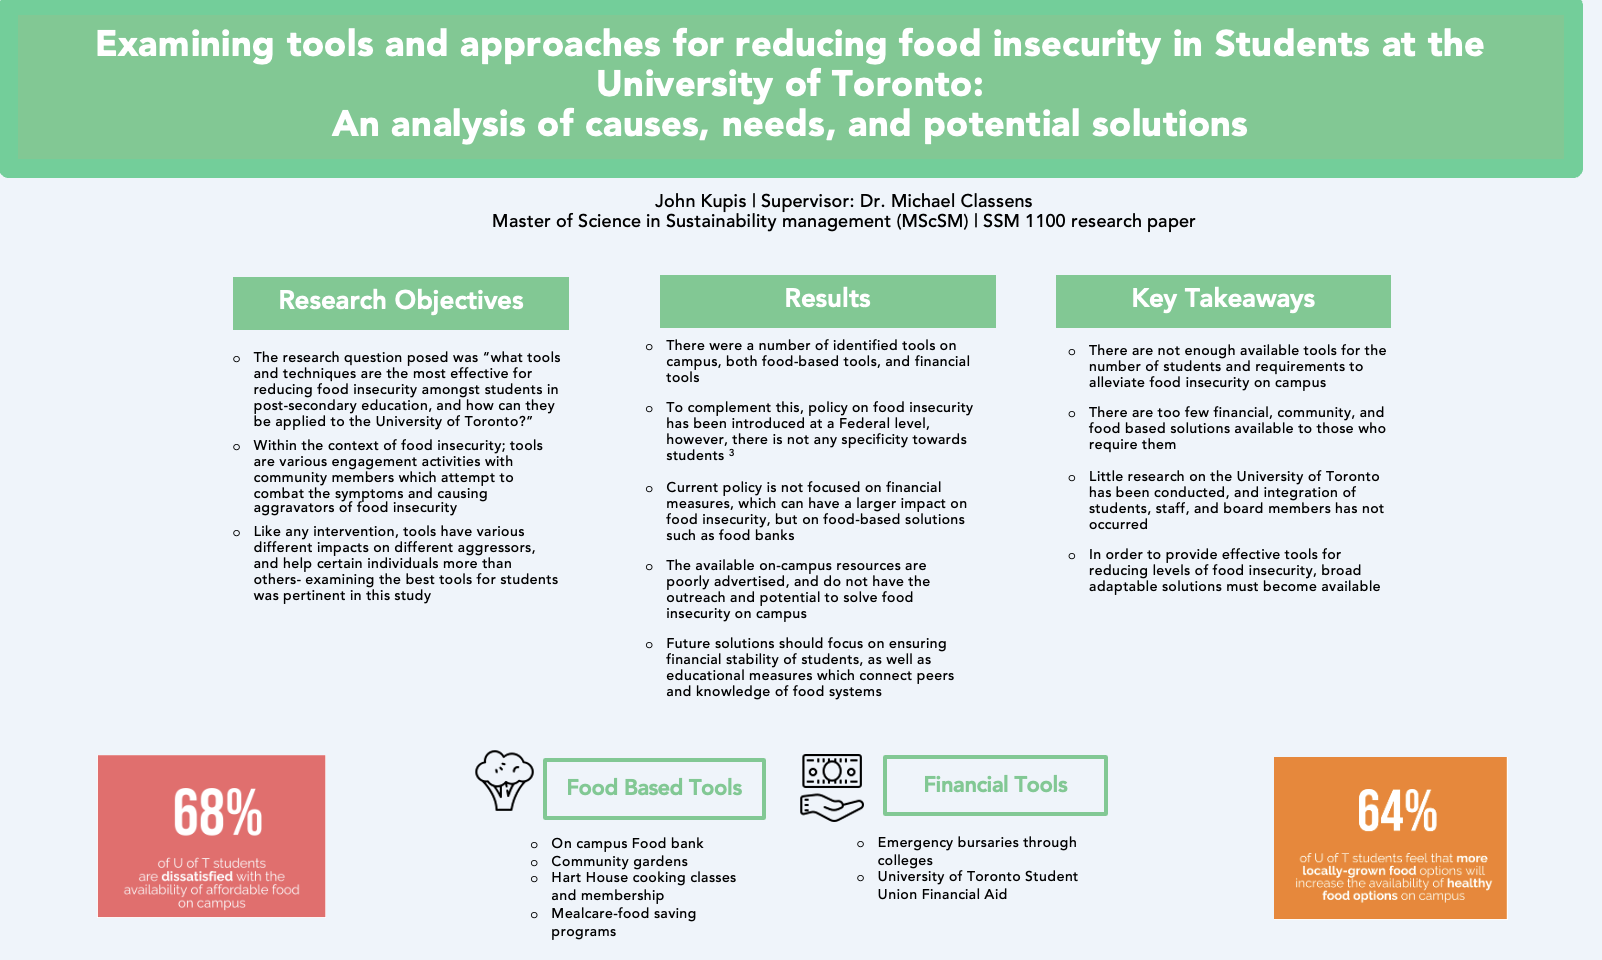 Showcase Image for Examining tools and approaches for reducing Food Insecurity in students at the University of Toronto: An analysis of causes, needs, and potential solutions